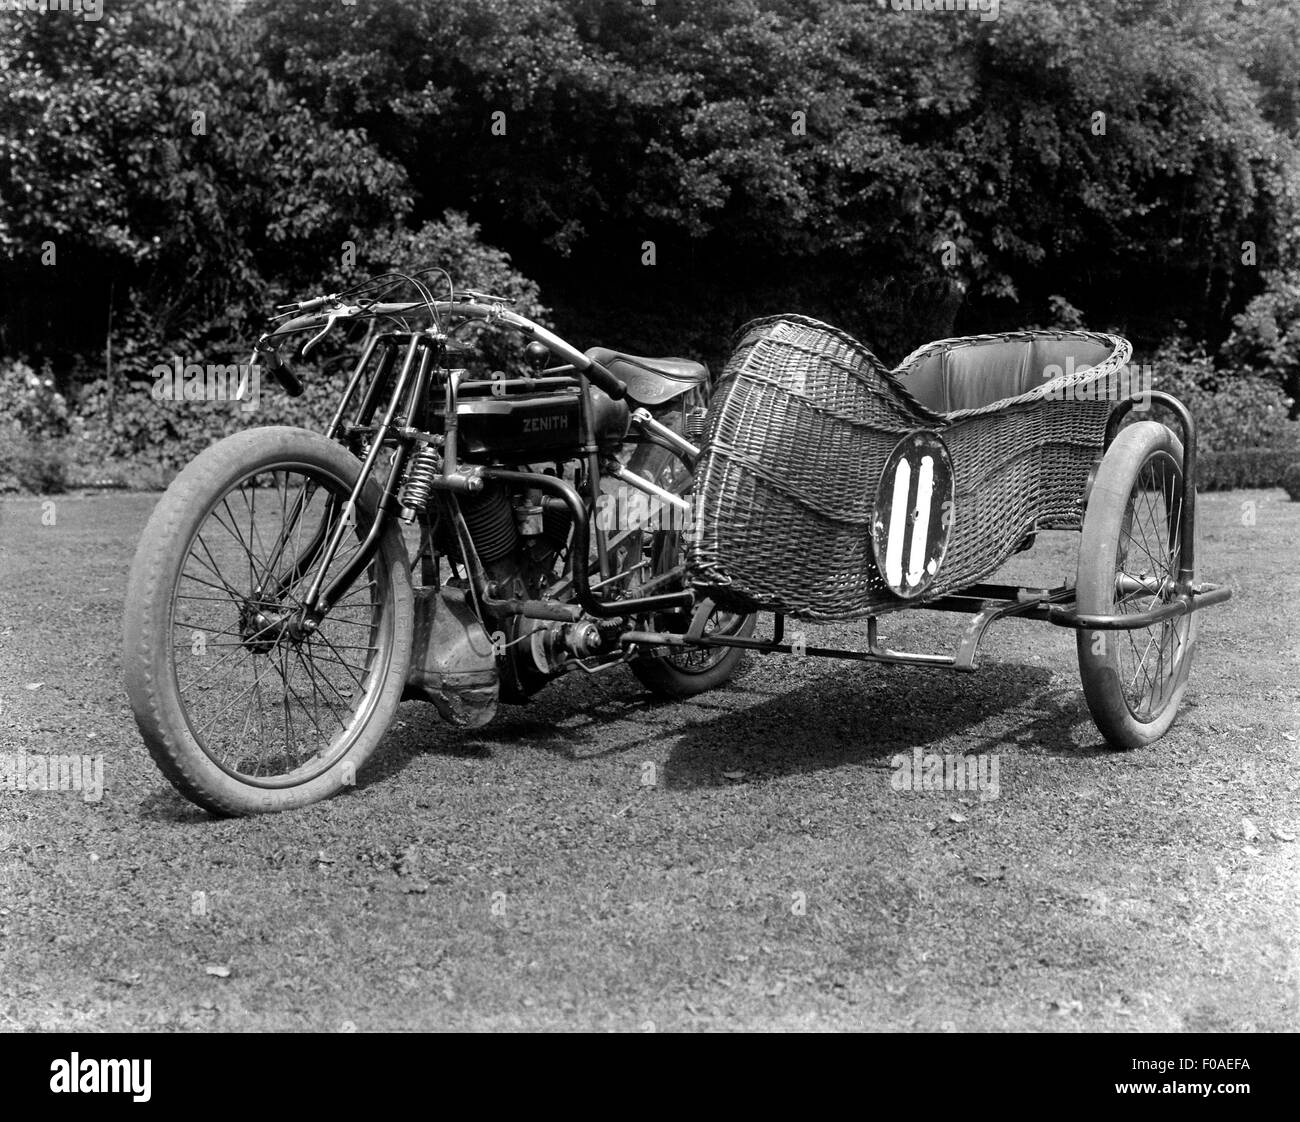 AJAXNETPHOTO - 1908-1914;1911 (APPROX) - EDWARDIAN MOTORCYCLE - ZENITH WITH WICKER BASKET SIDECAR. PHOTO:AJAX VINTAGE PICTURE LIBRARY REF:JB 2 80201 47 Stock Photo